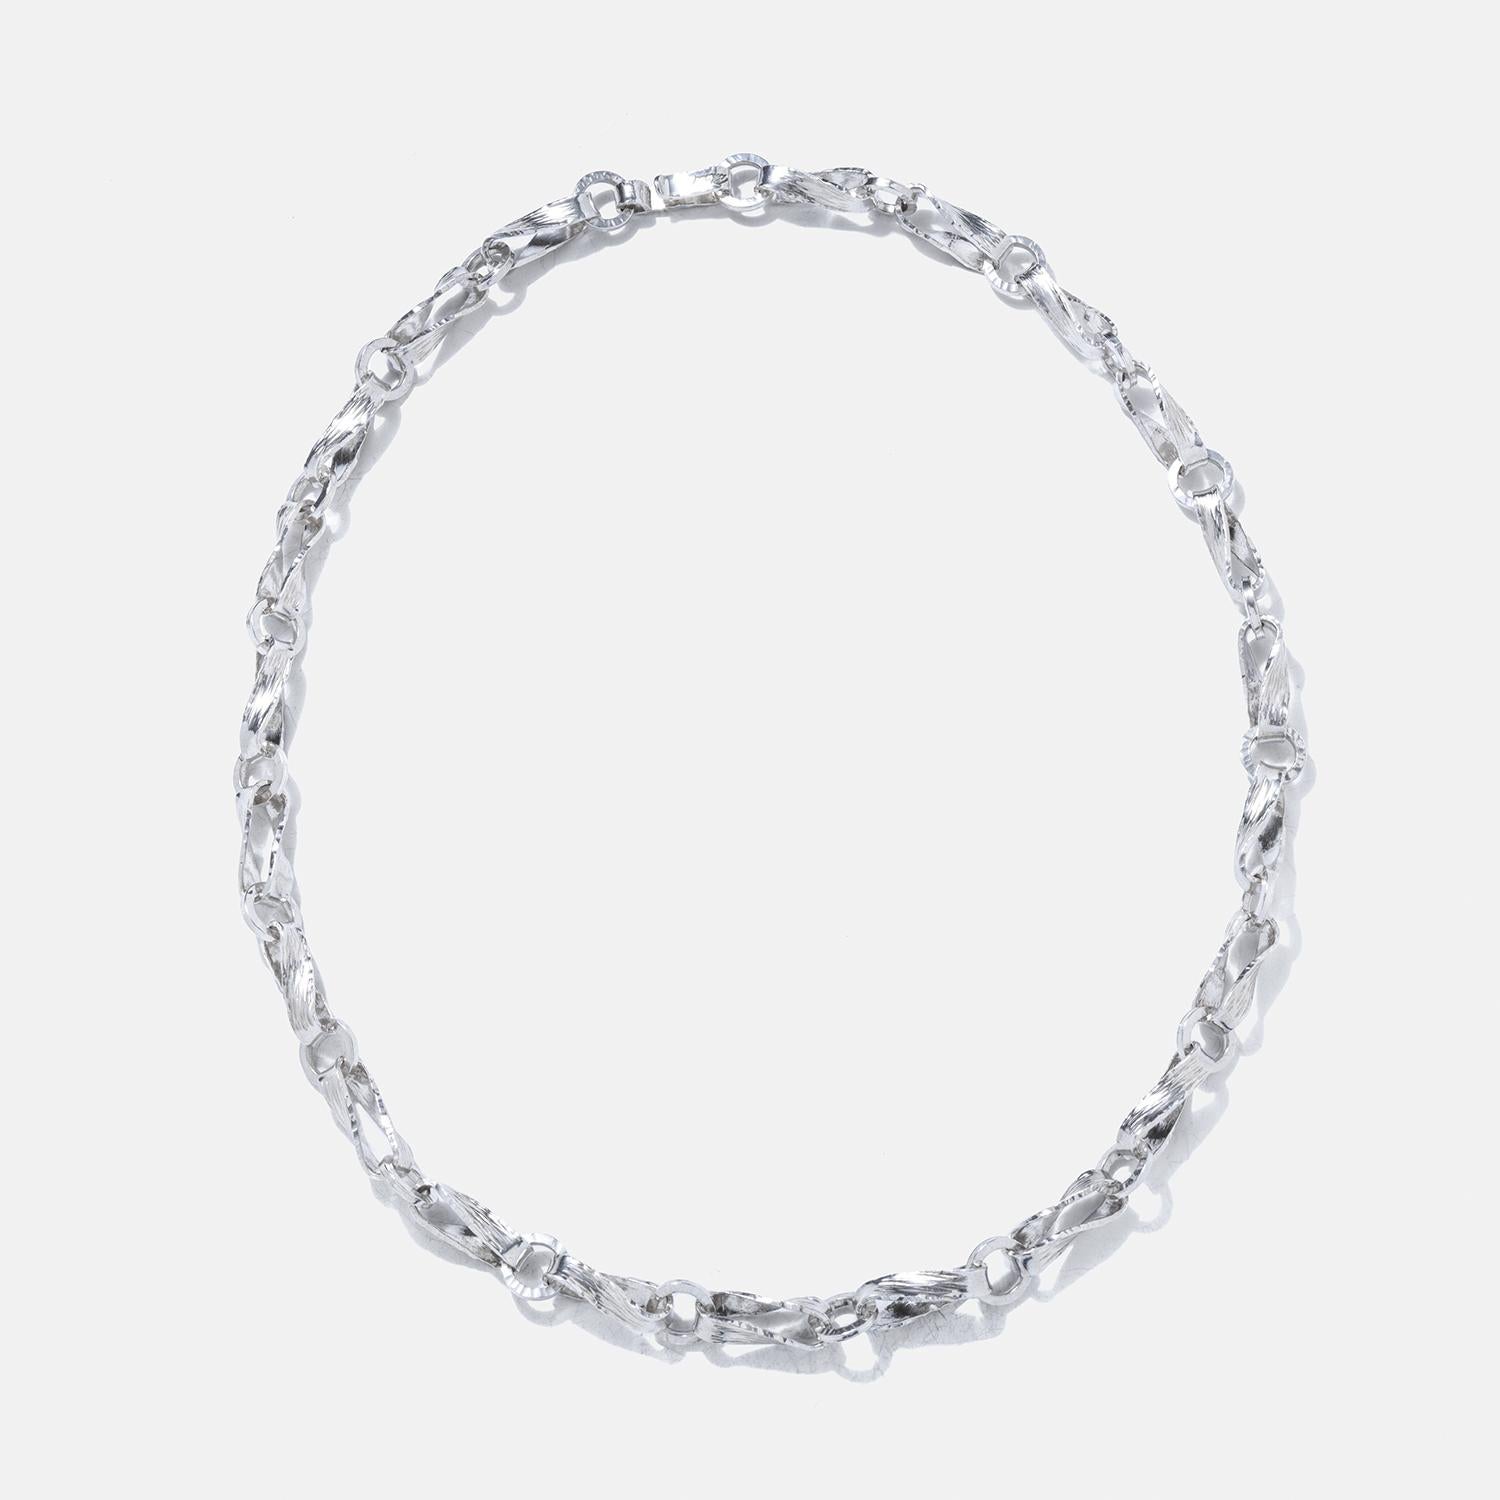 This substantial sterling silver necklace features a playful ring and bar chain design, with links that are artfully twisted to create a dynamic and eye-catching appearance. The surface of the necklace is finished with a texture, giving it a